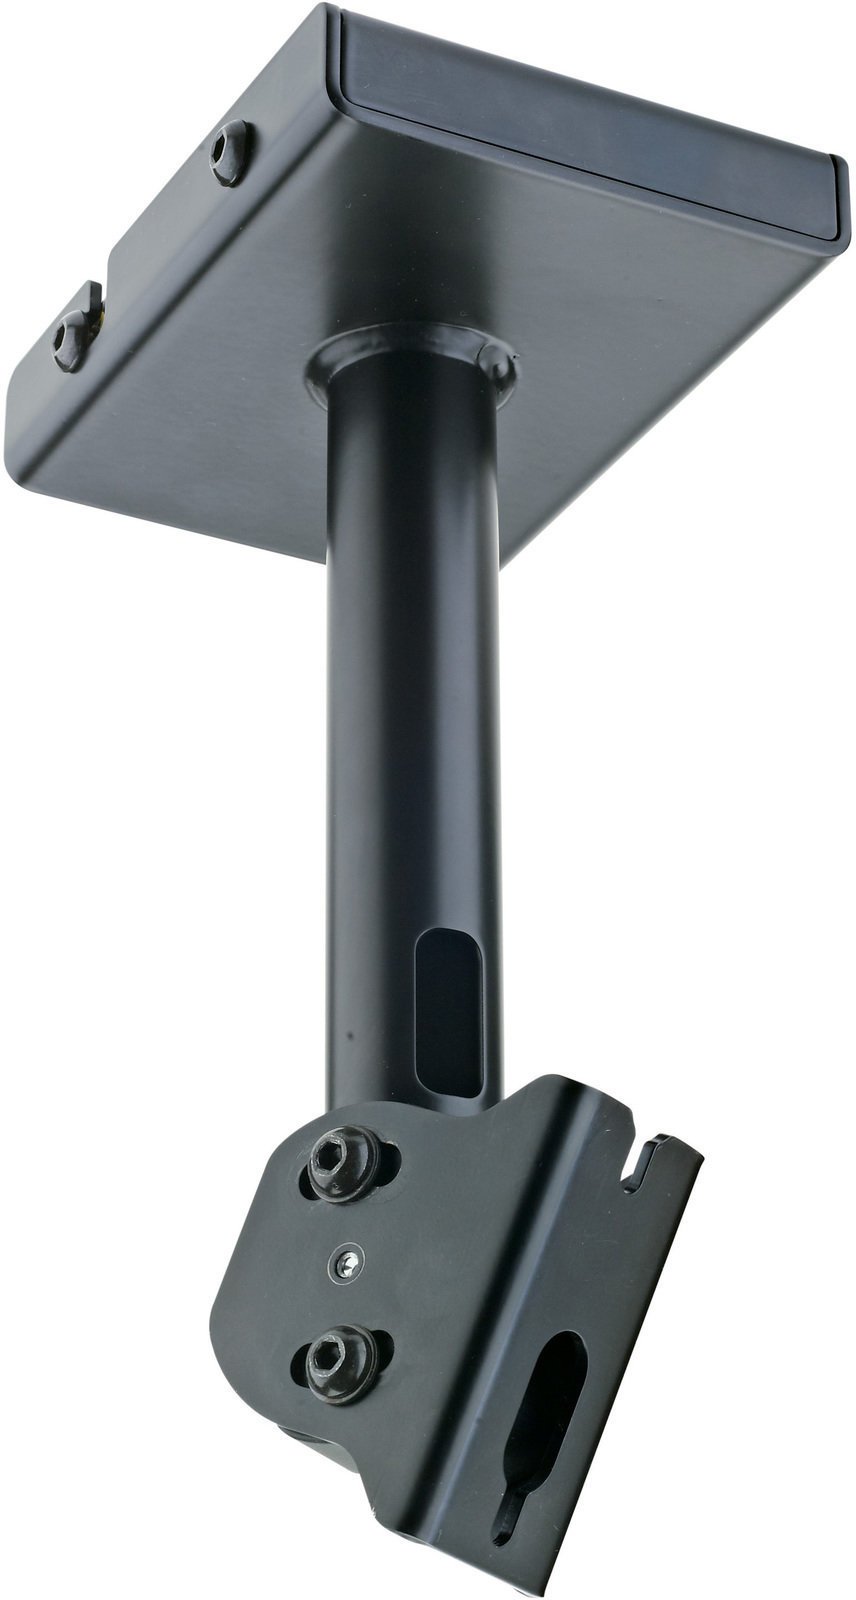 Wall mount for speakerboxes Konig & Meyer 24496 Wall mount for speakerboxes